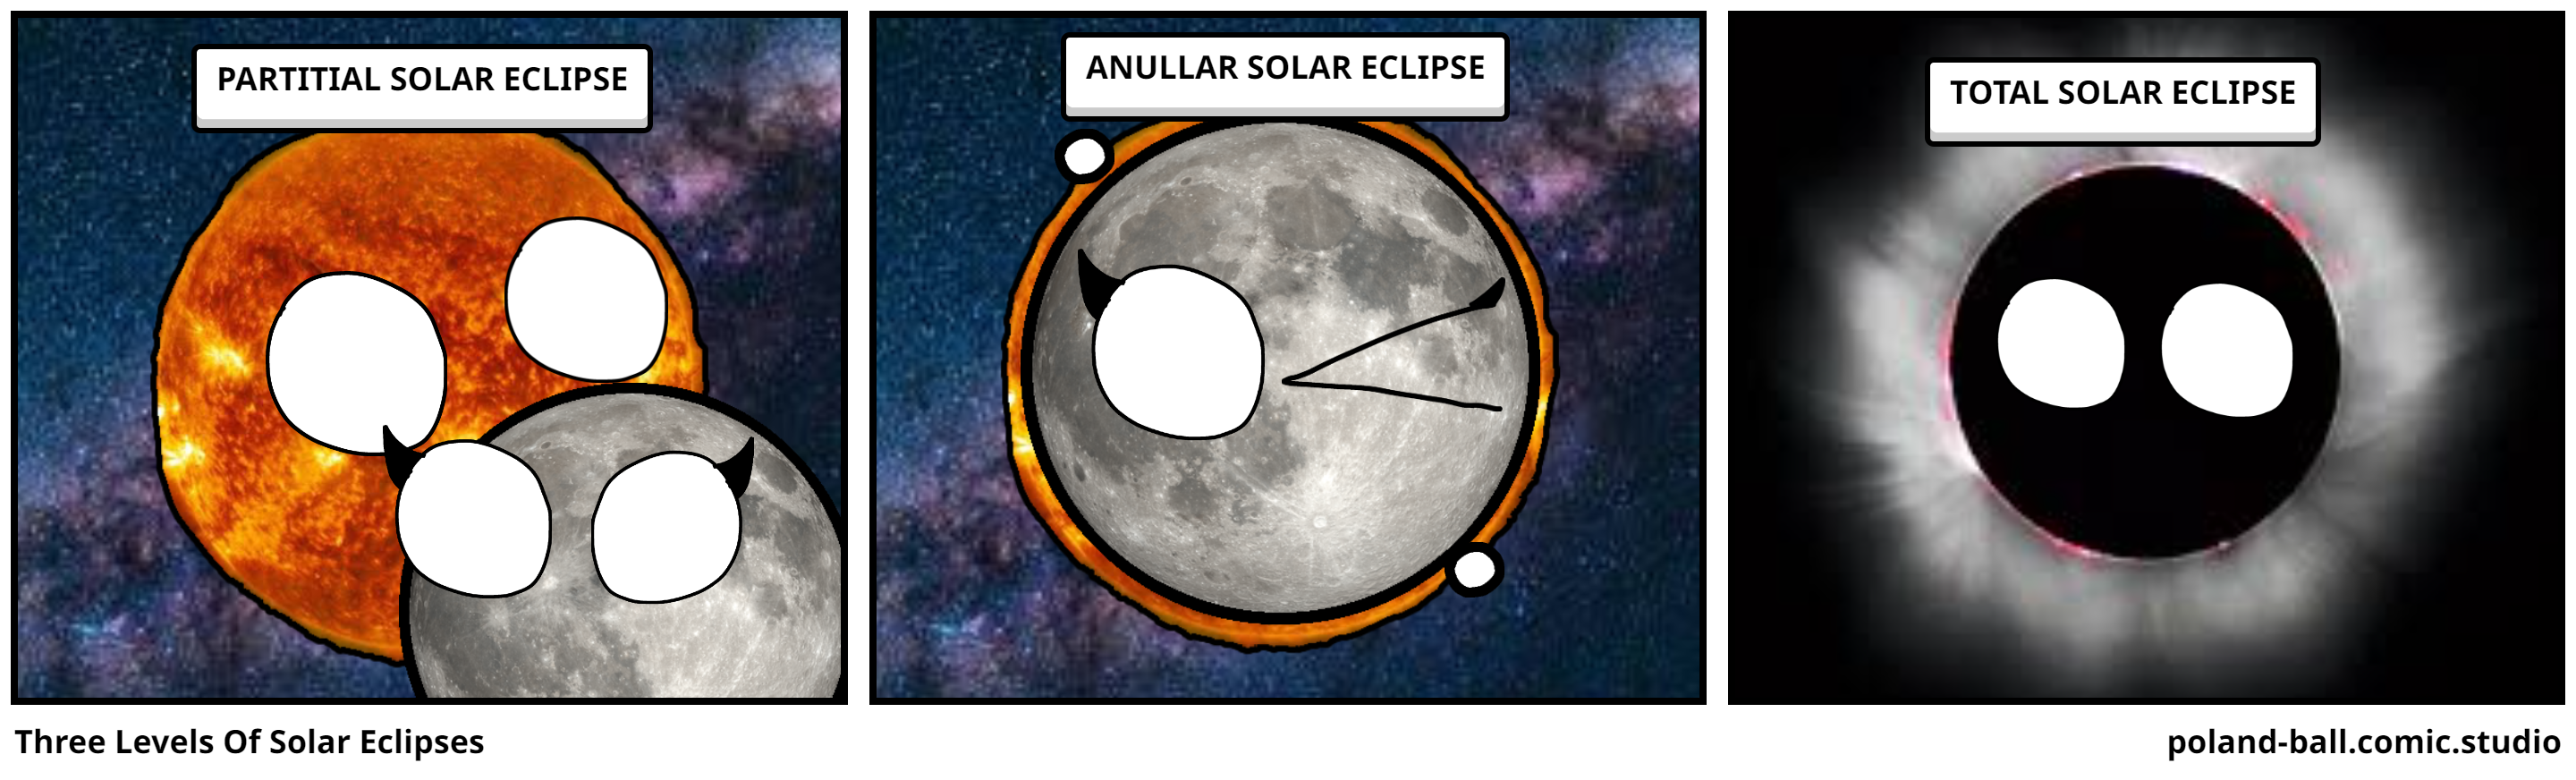 Three Levels Of Solar Eclipses